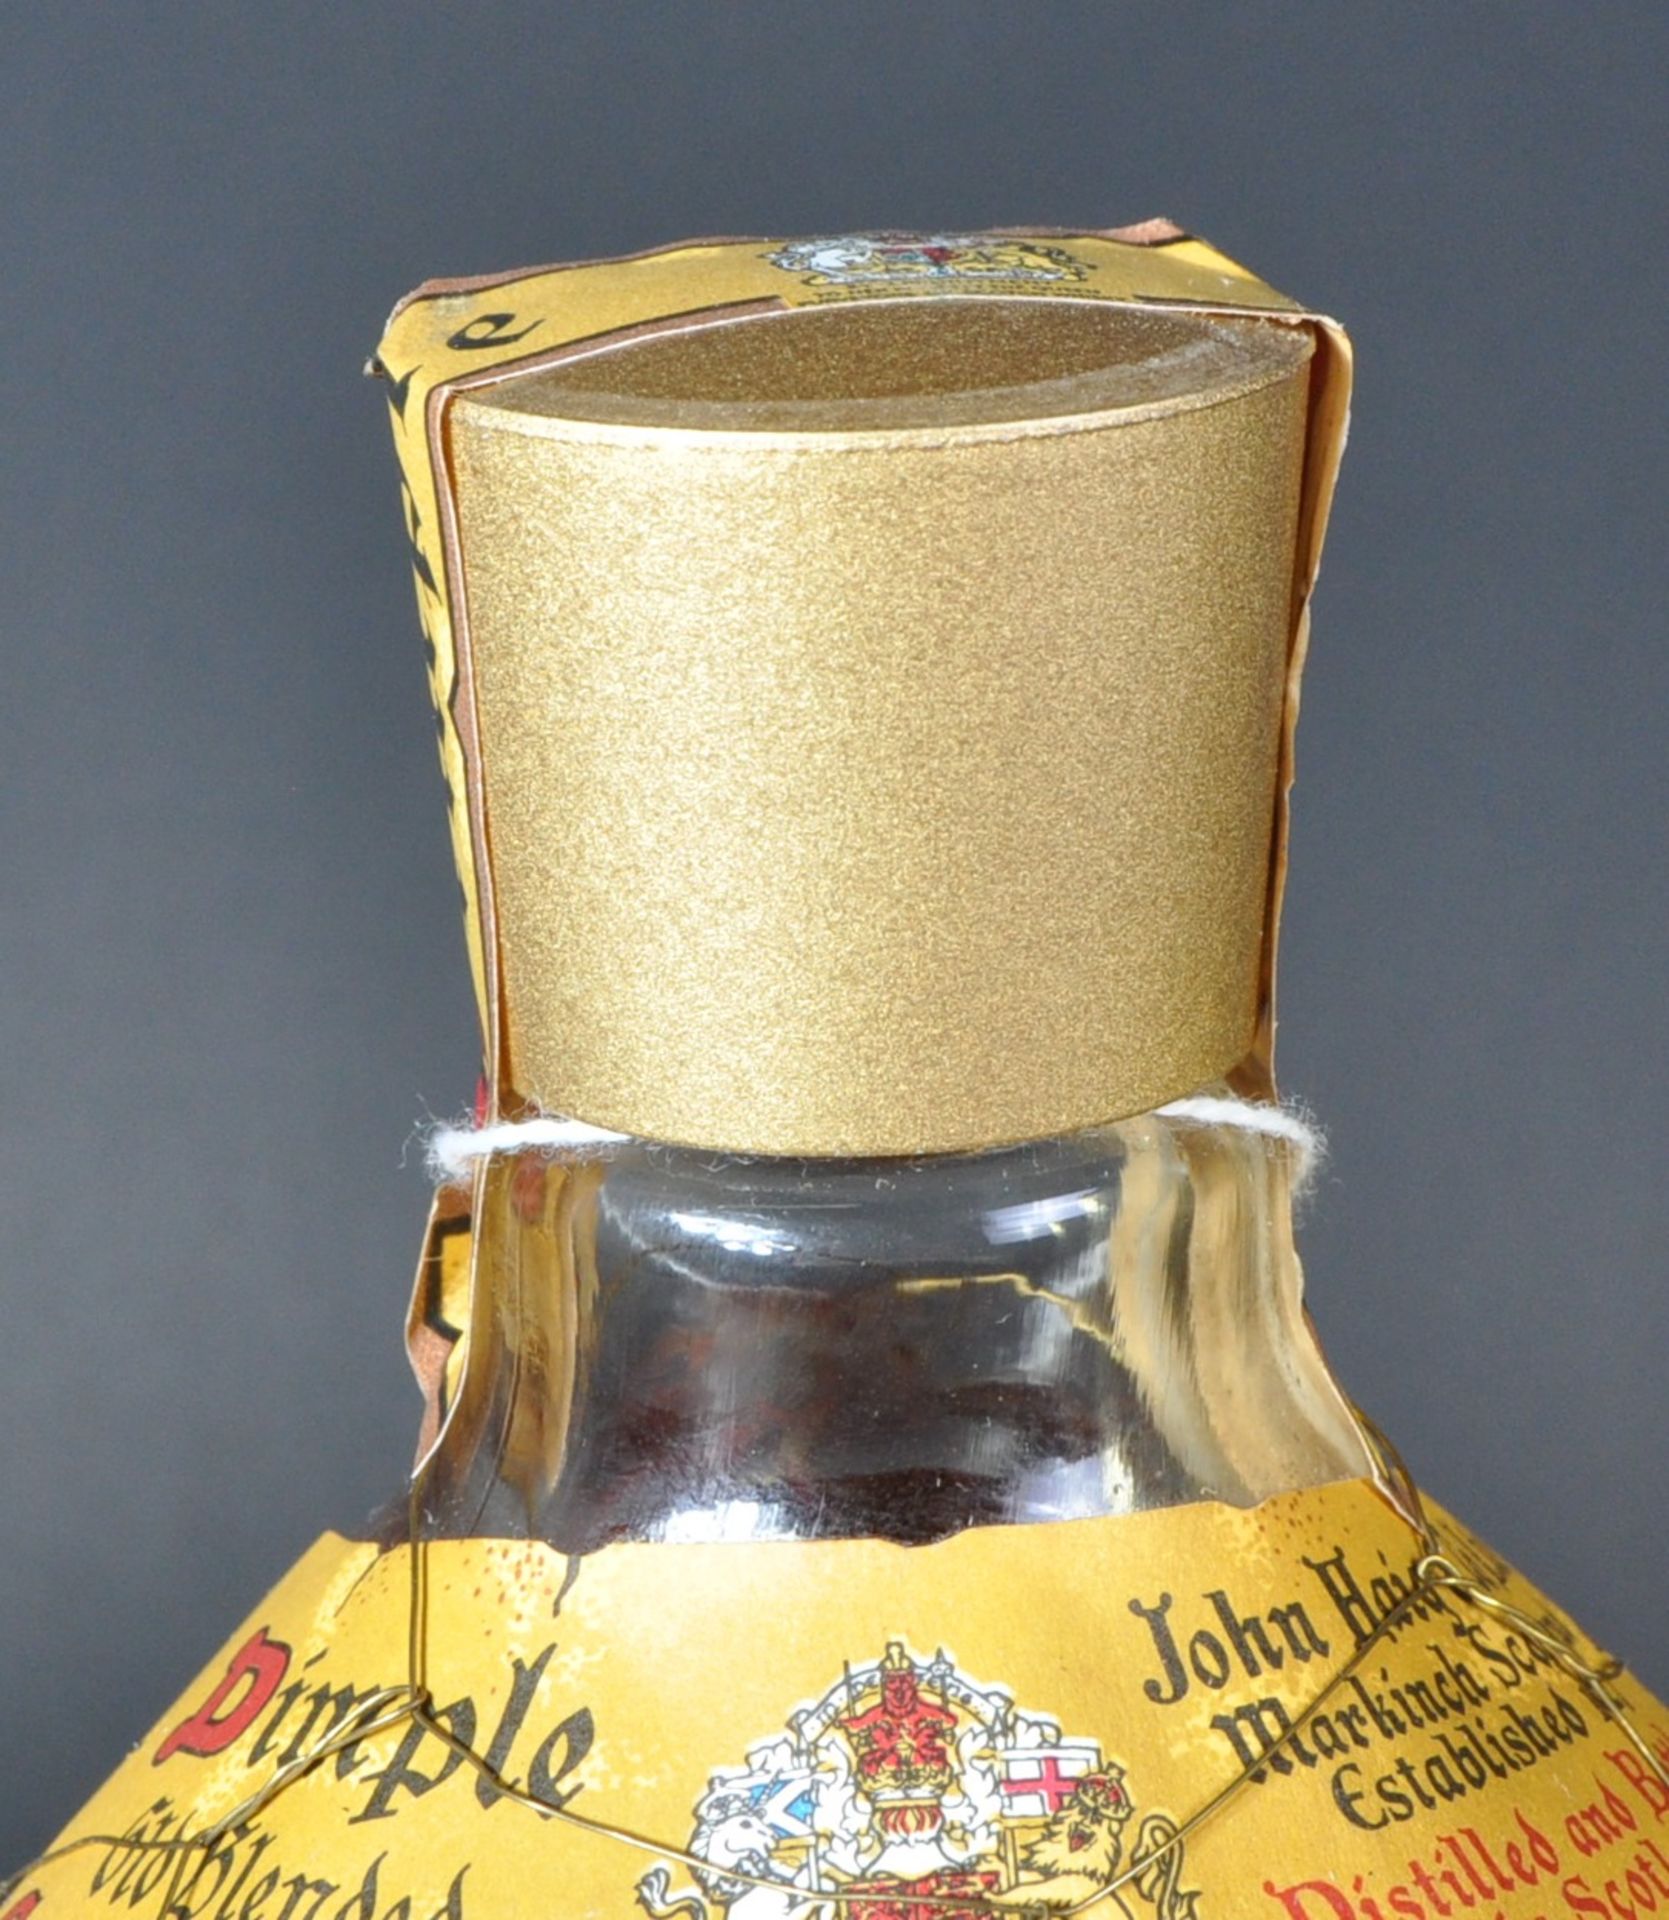 BOXED VINTAGE BOTTLE OF HAIG DIMPLE SCOTISH WHISKY - Image 2 of 2